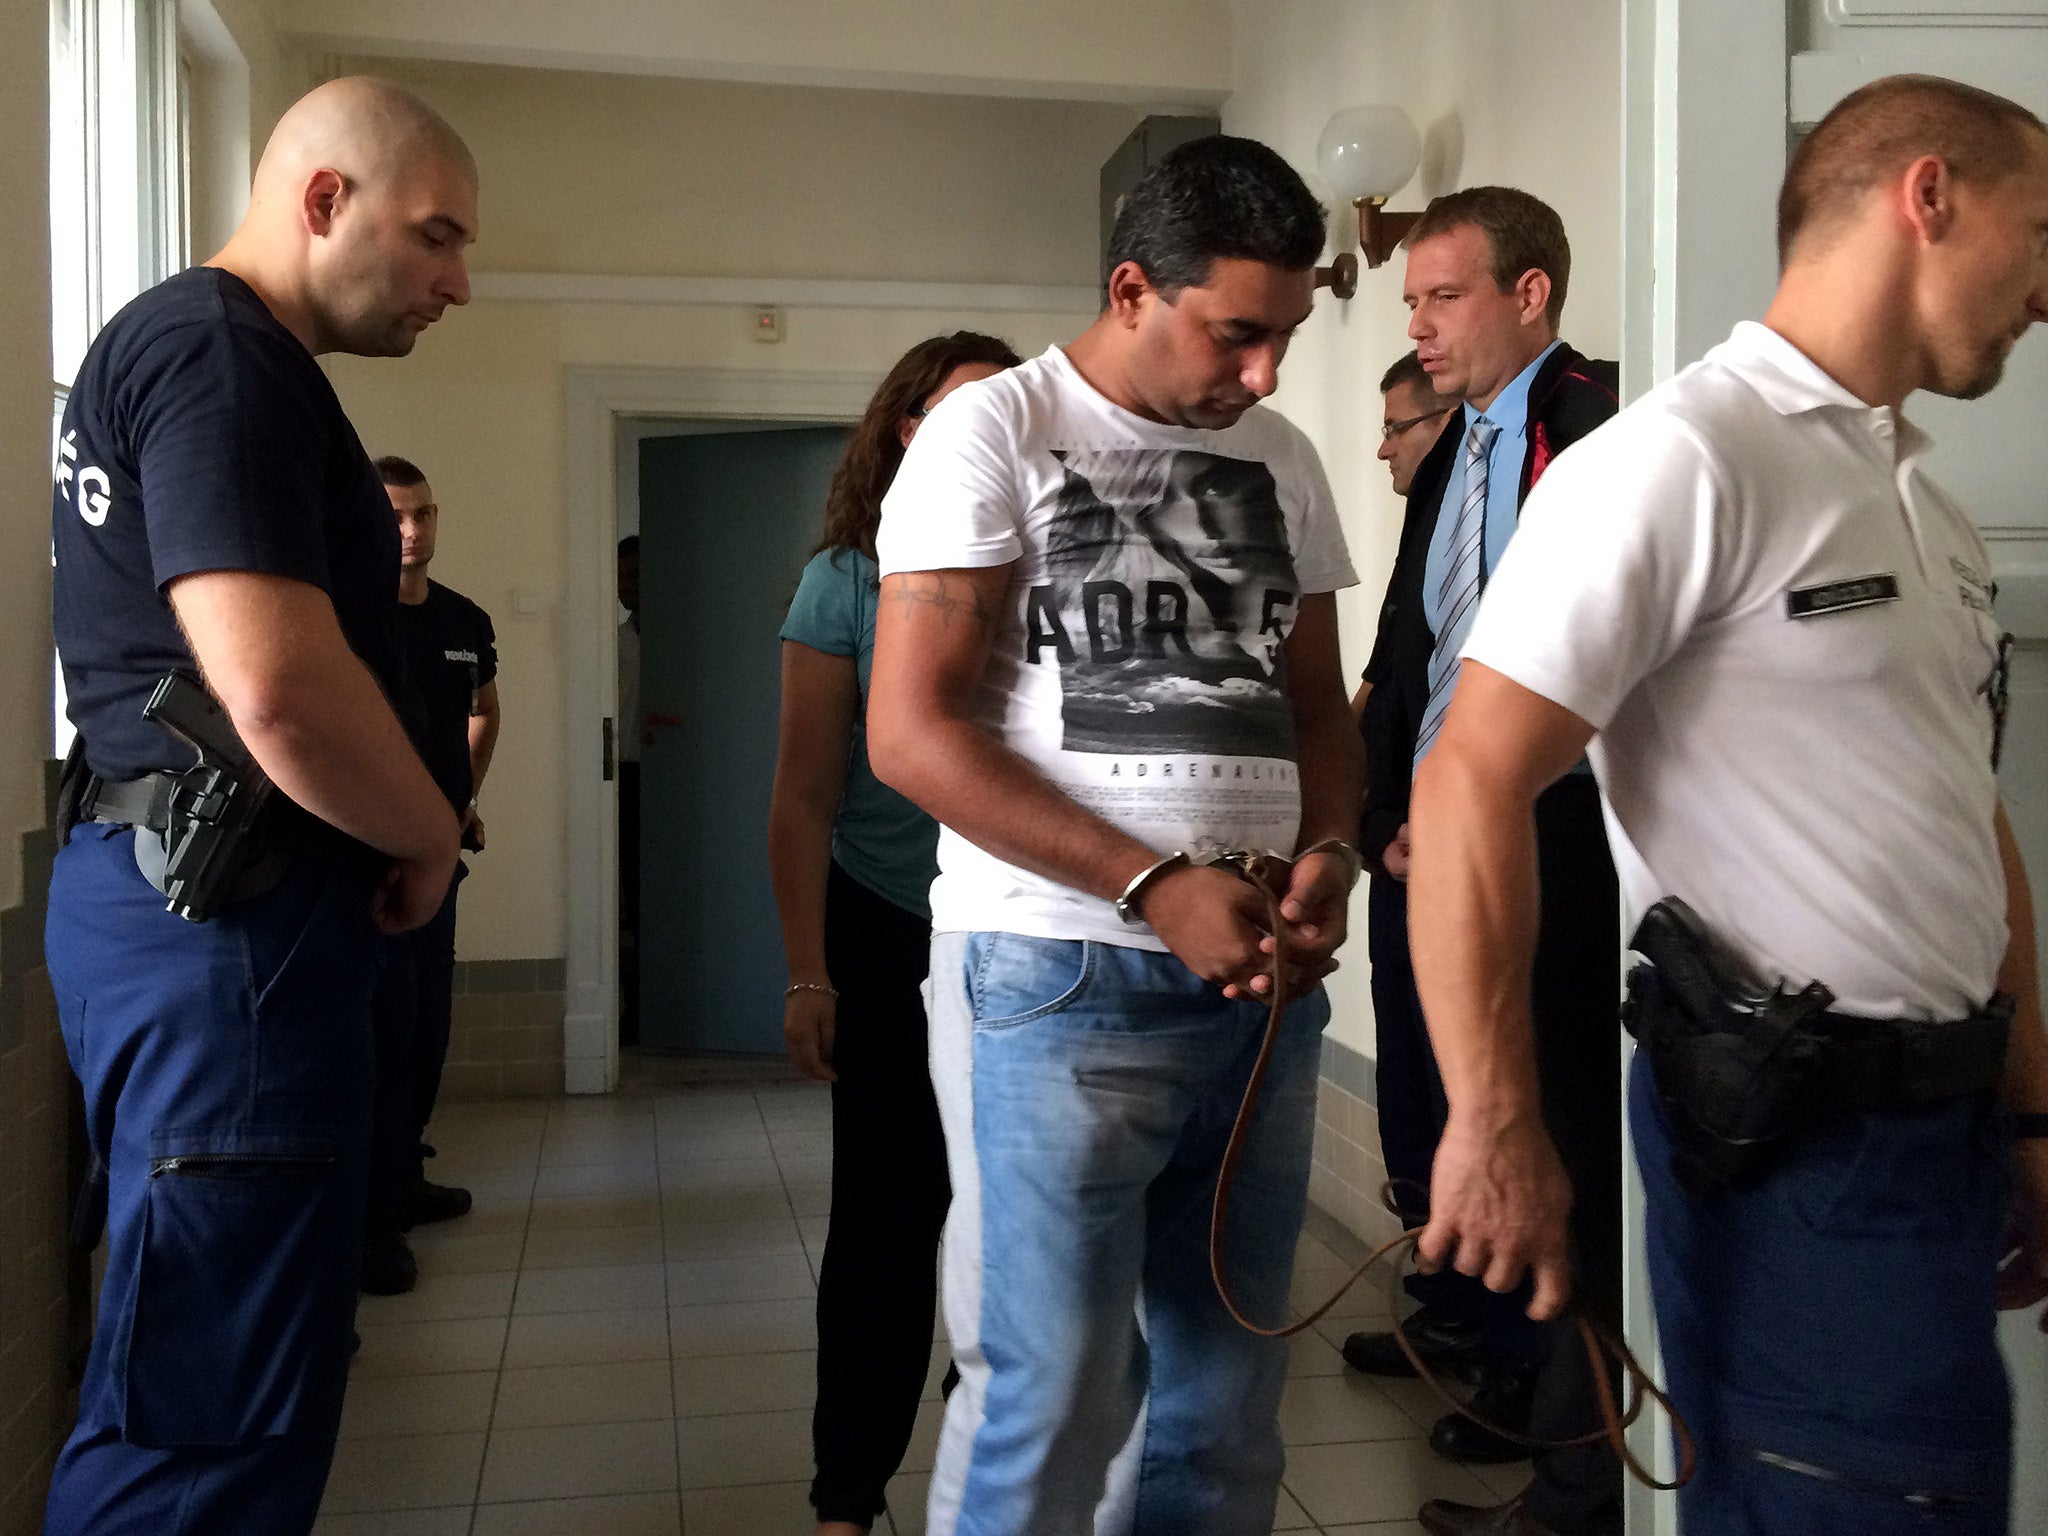 One of the suspects in court in Hungary over the deaths of 71 refugees